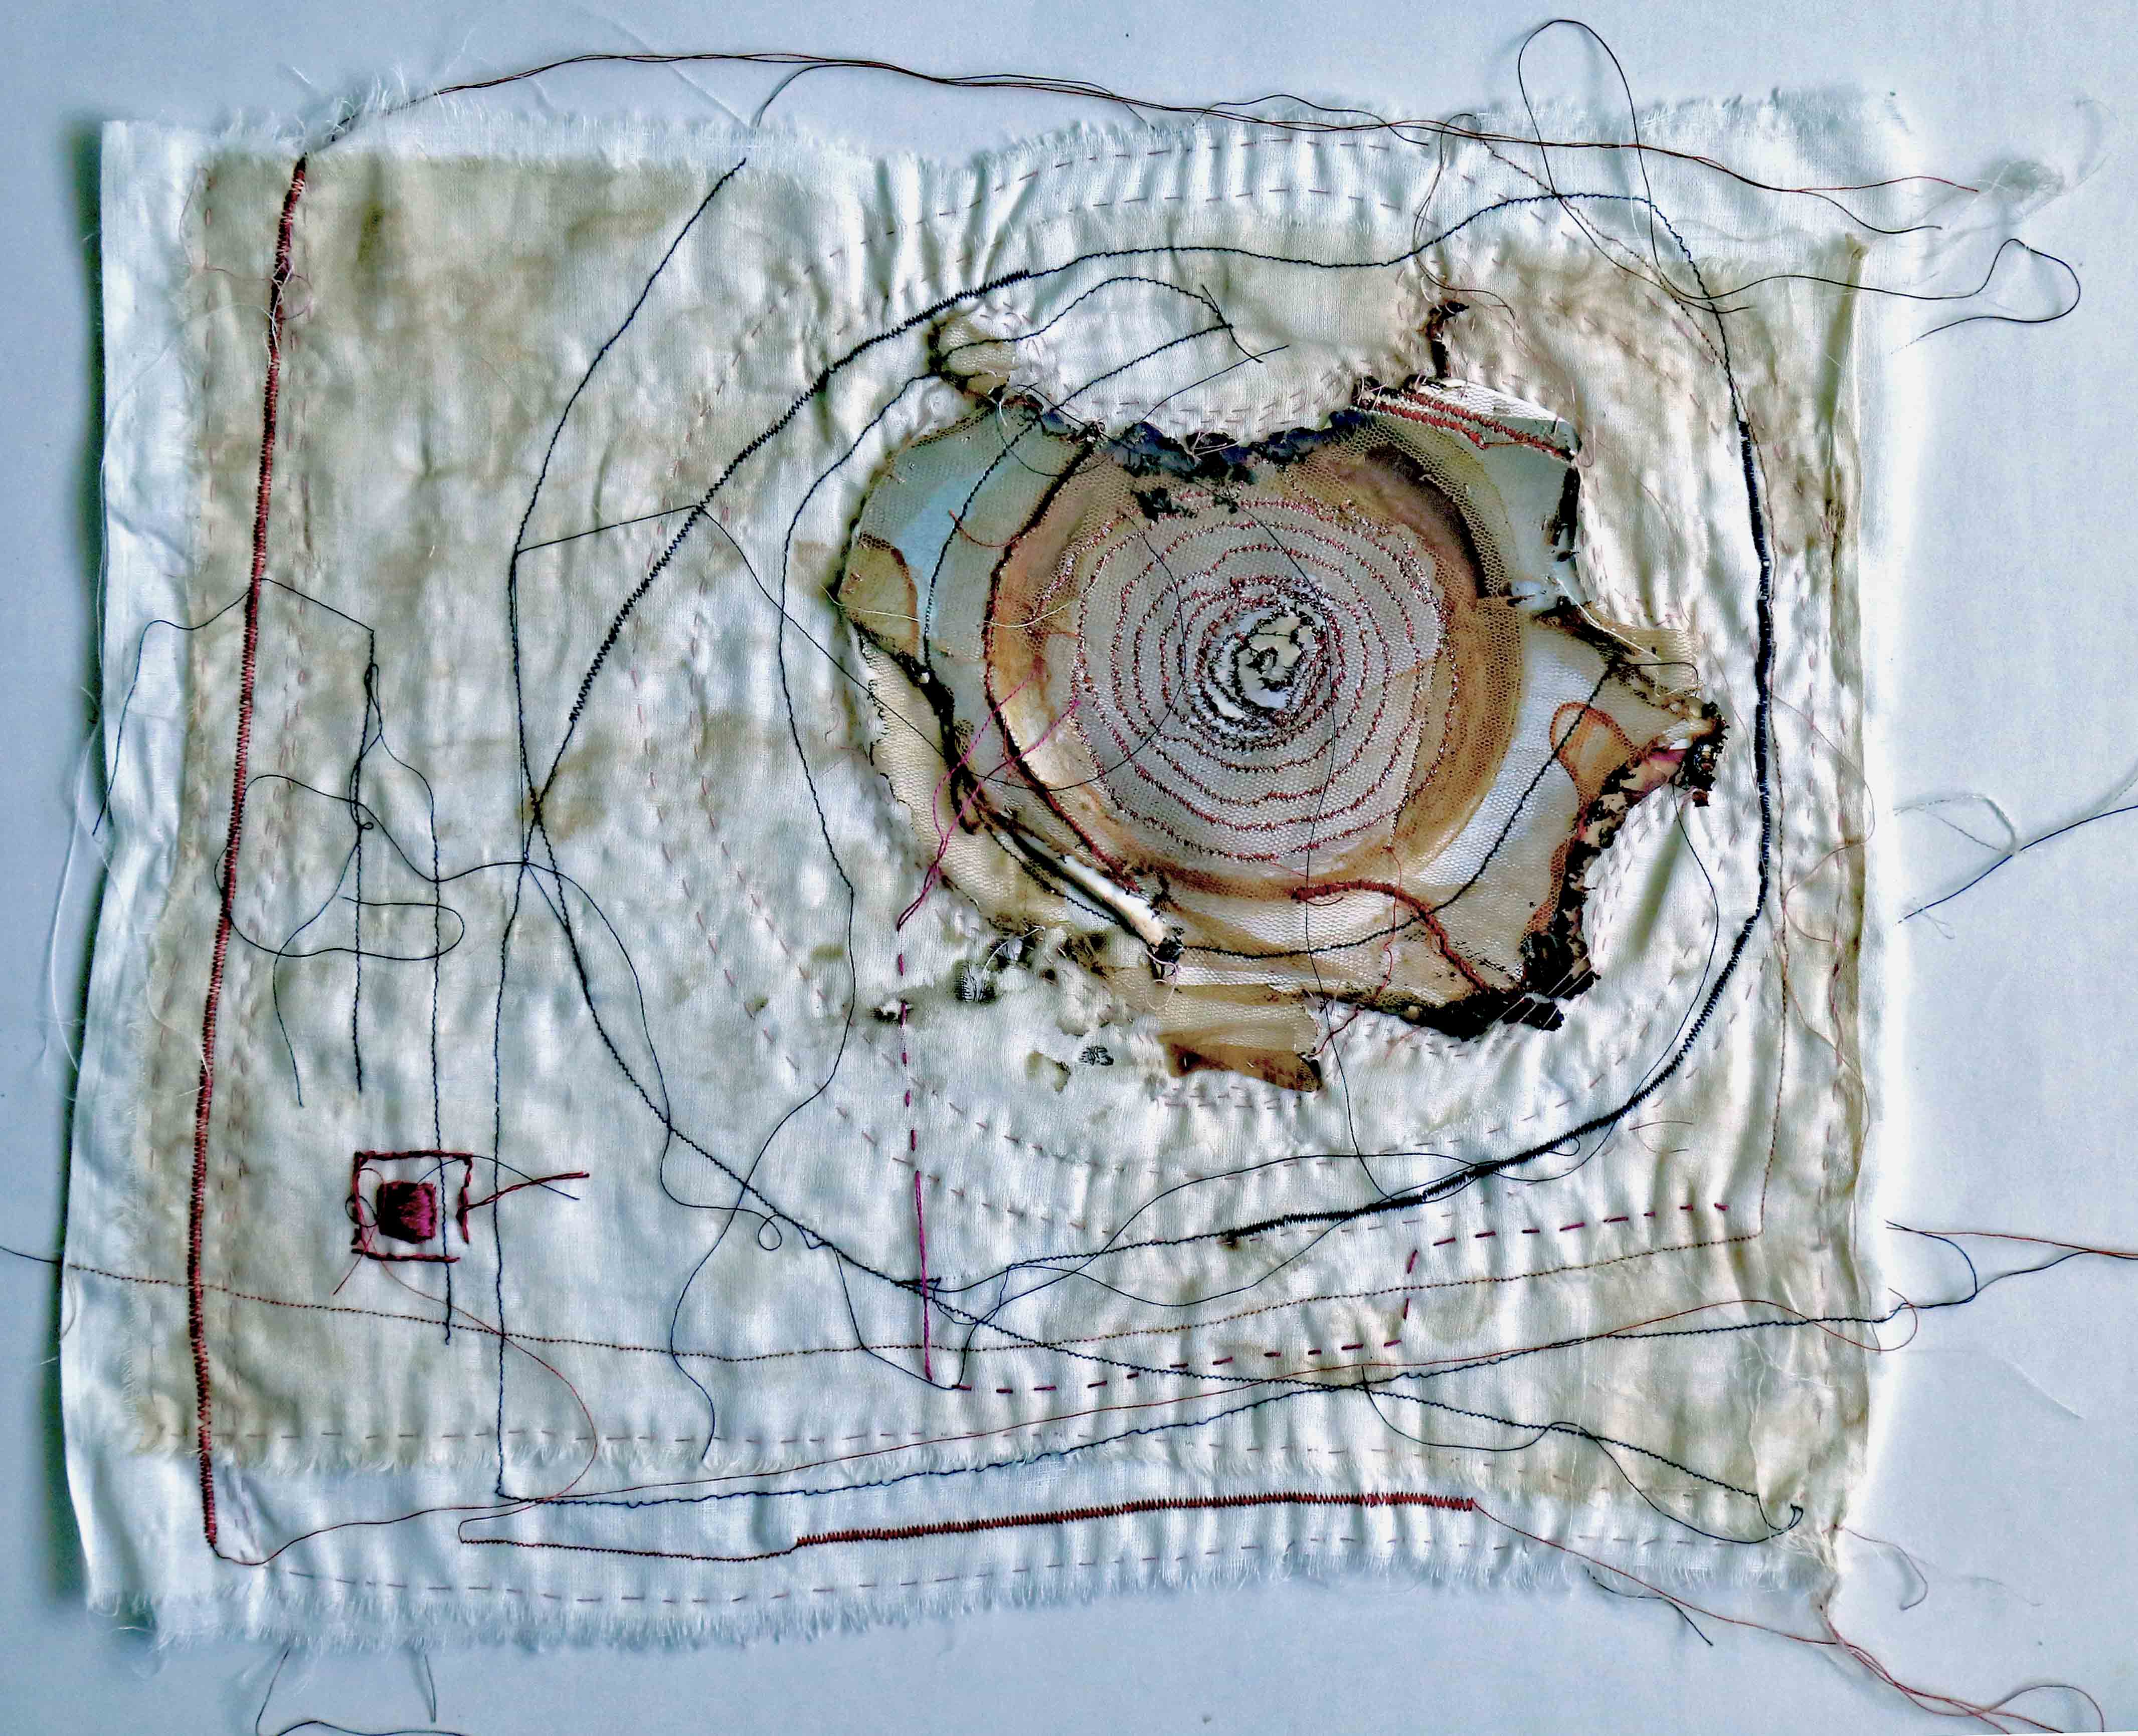 Memory Spiral, 2015, [10 x 12 inches – unframed, set of three], Materials: photographic paper, cotton fabrics, cotton floss cotton-polyester thread, Technique: burning, layering, hand-sewing, machine embroidery, staining with tea-leaves